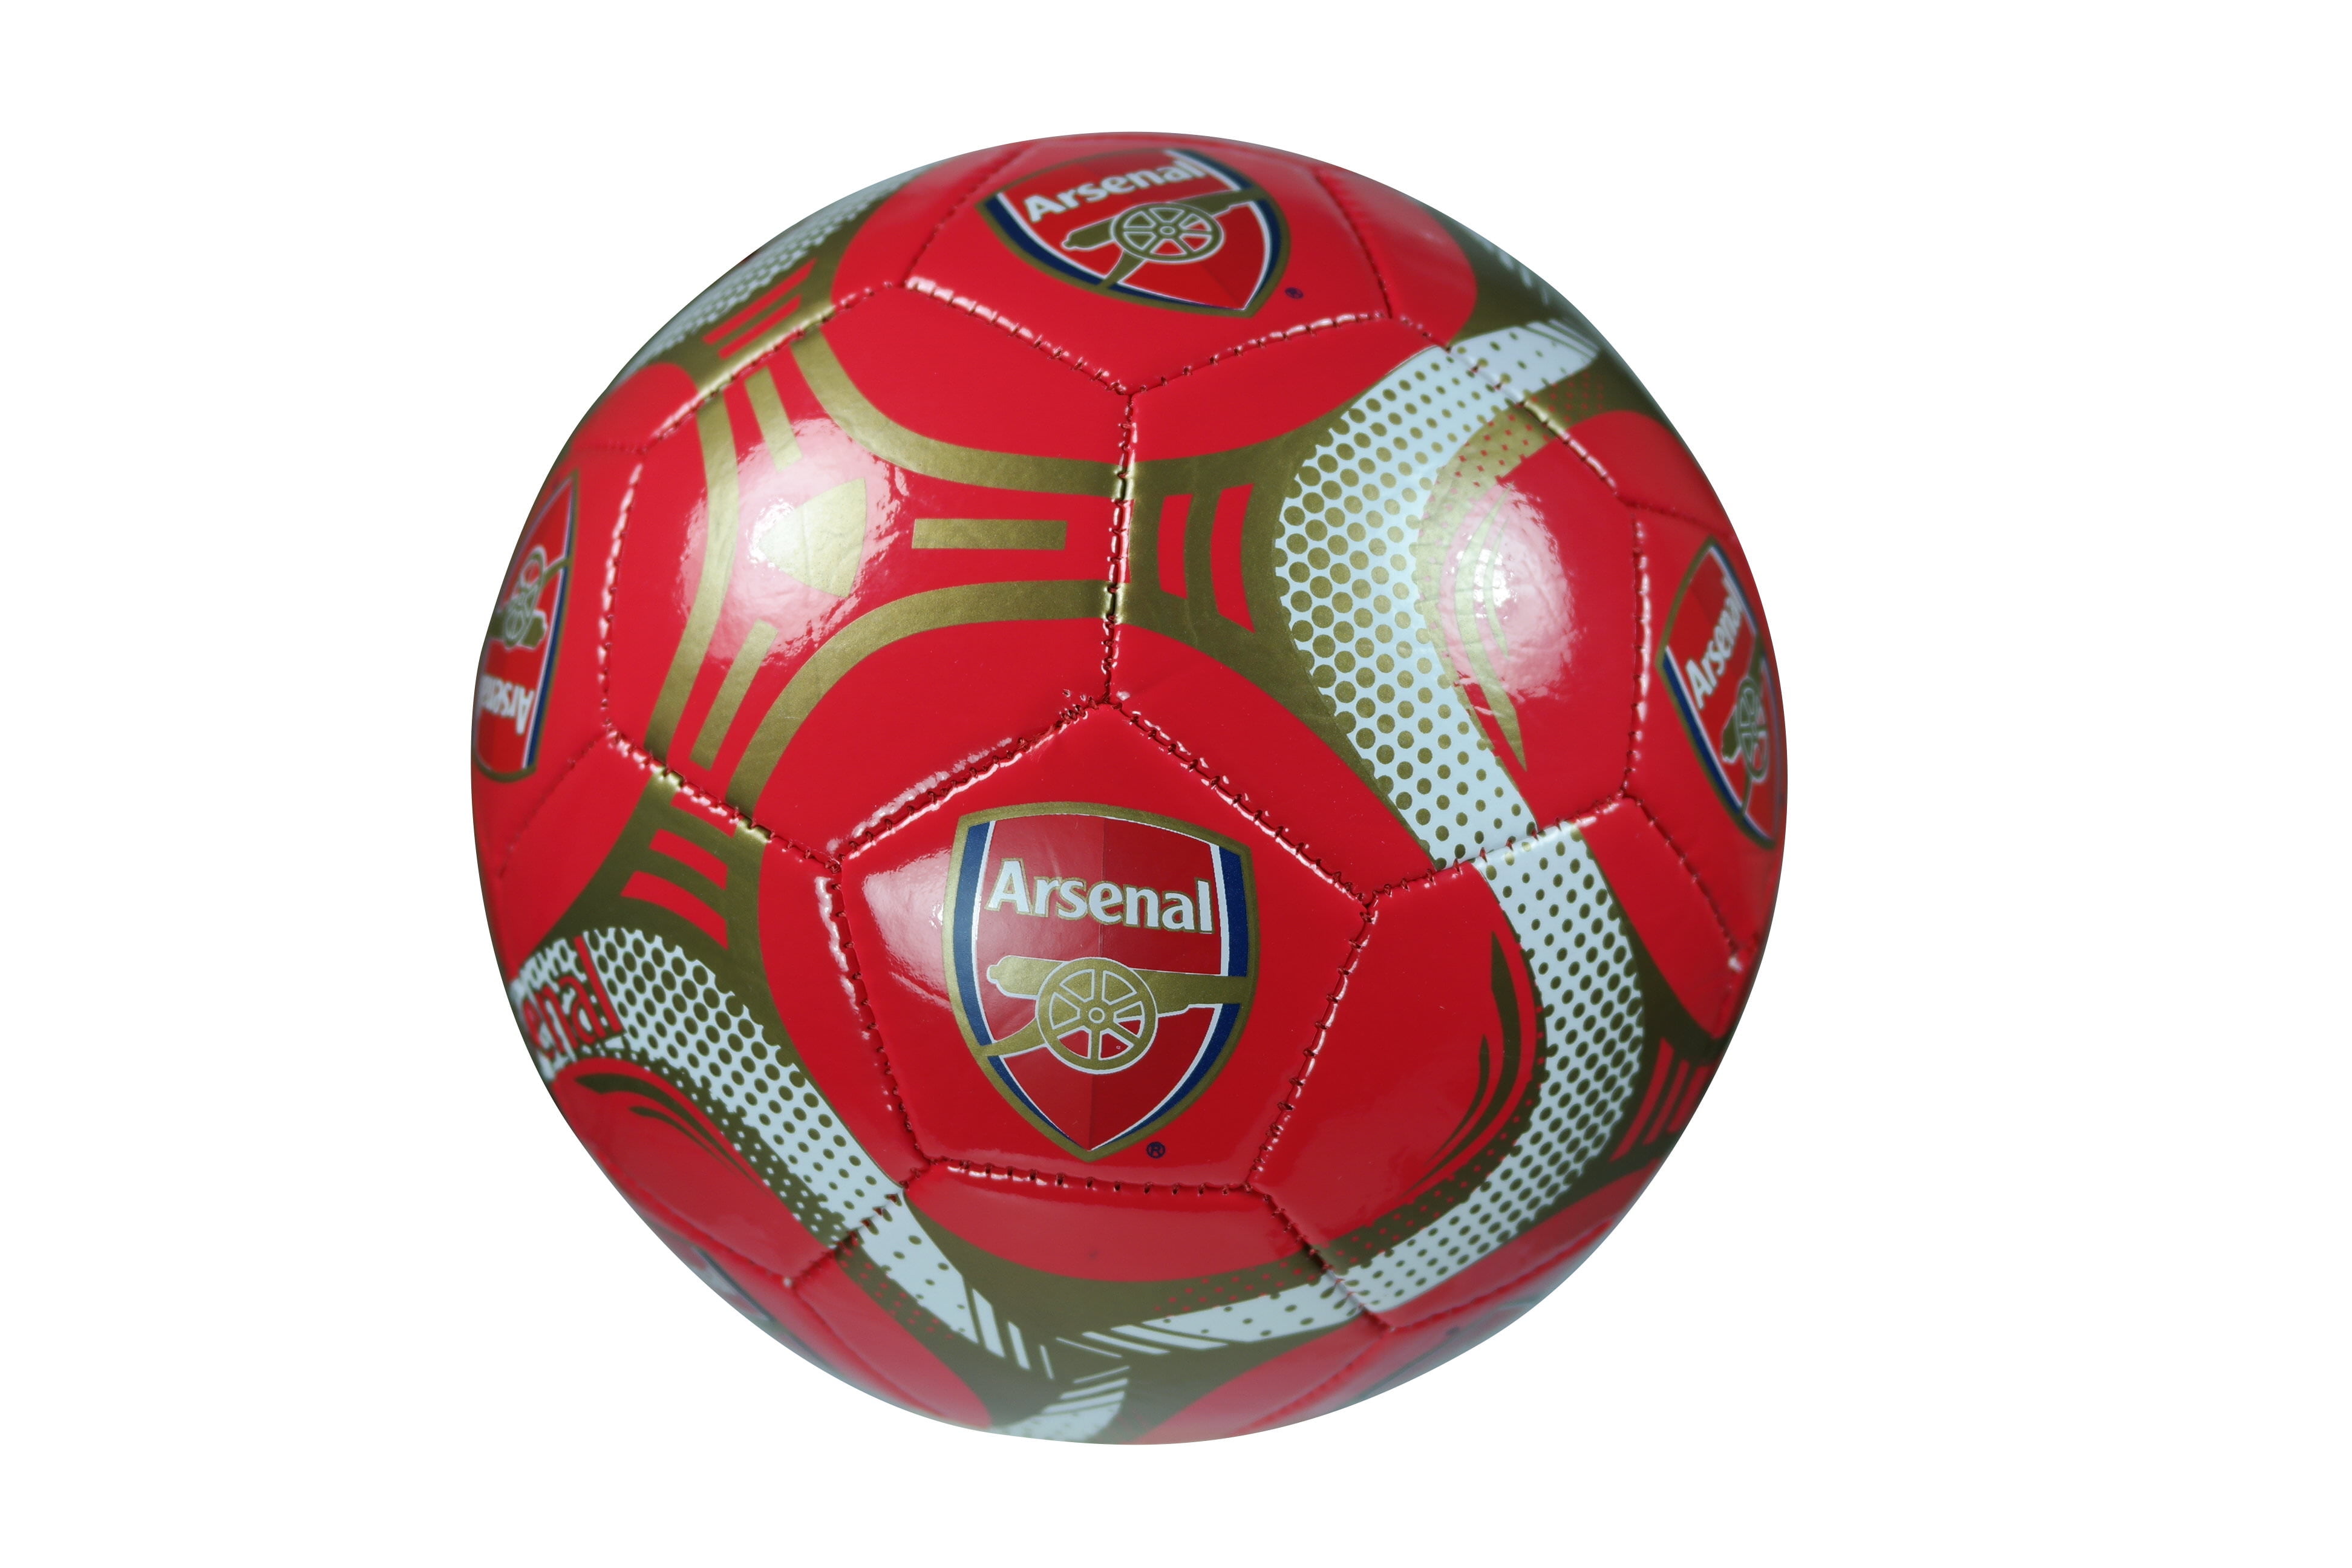 Arsenal Authentic Official Licensed Soccer Ball Size 4-001 Toy 